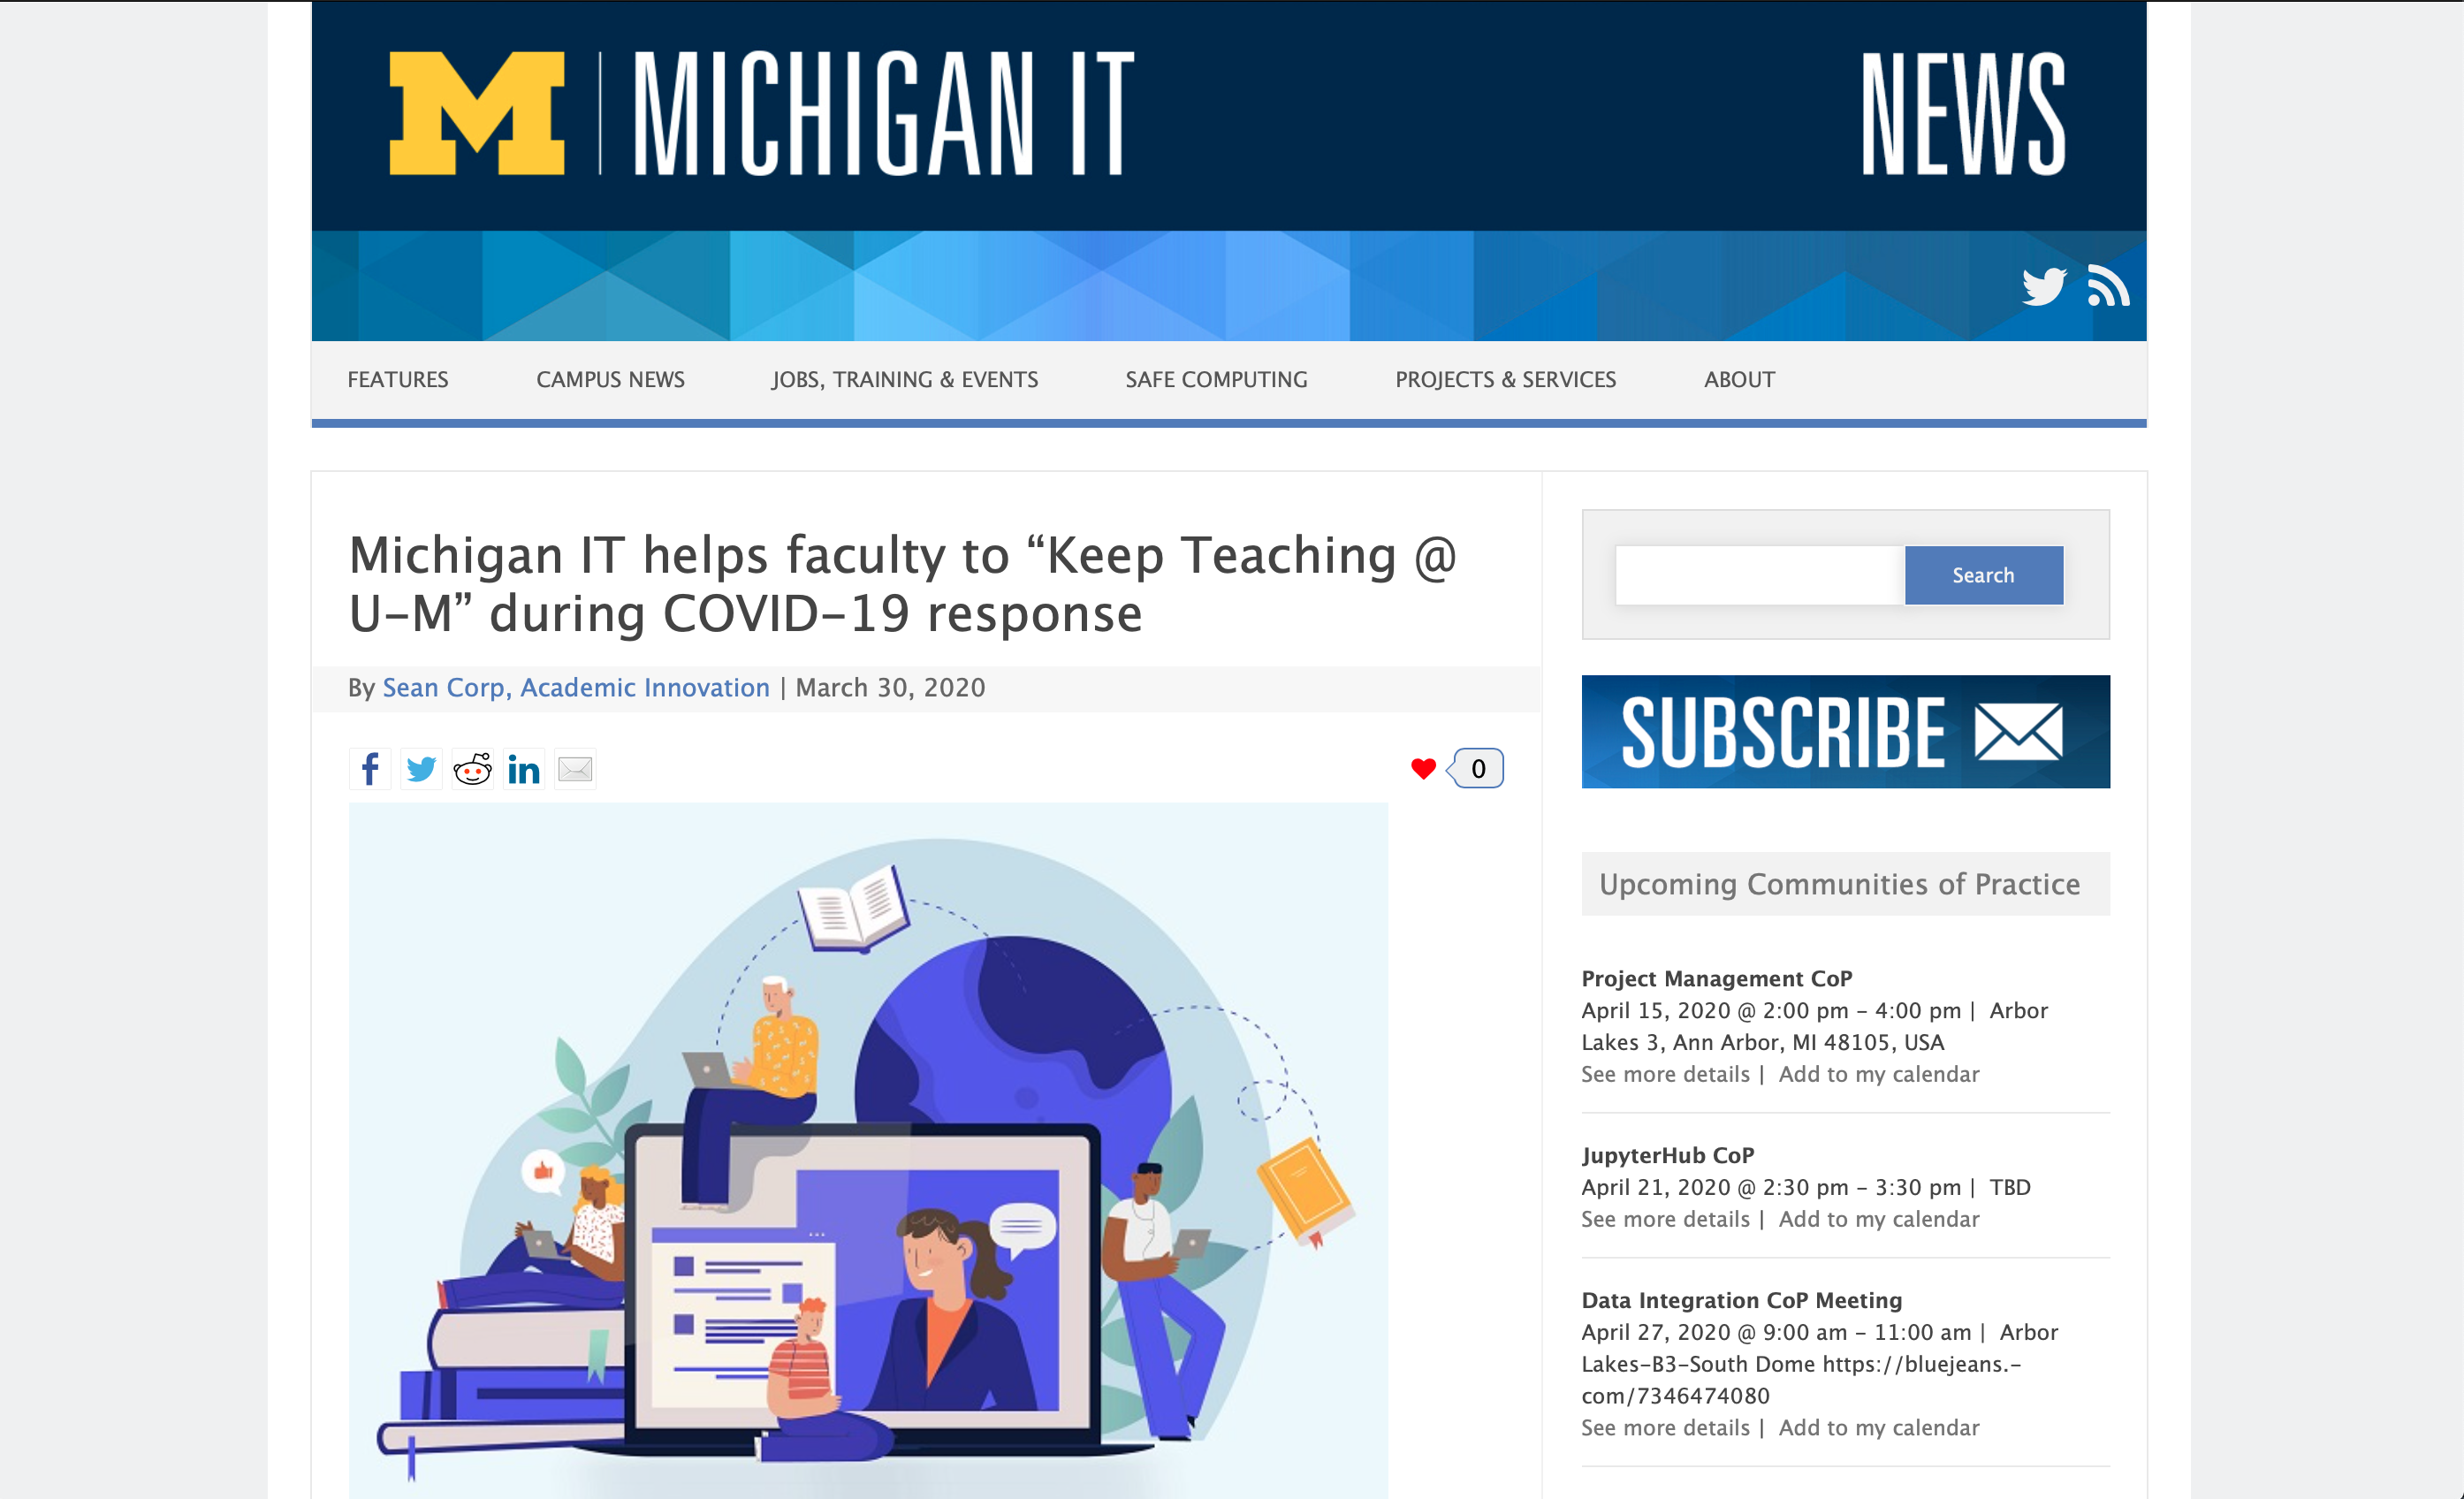 Michigan IT helps faculty to “Keep Teaching @ U-M” during COVID-19 response